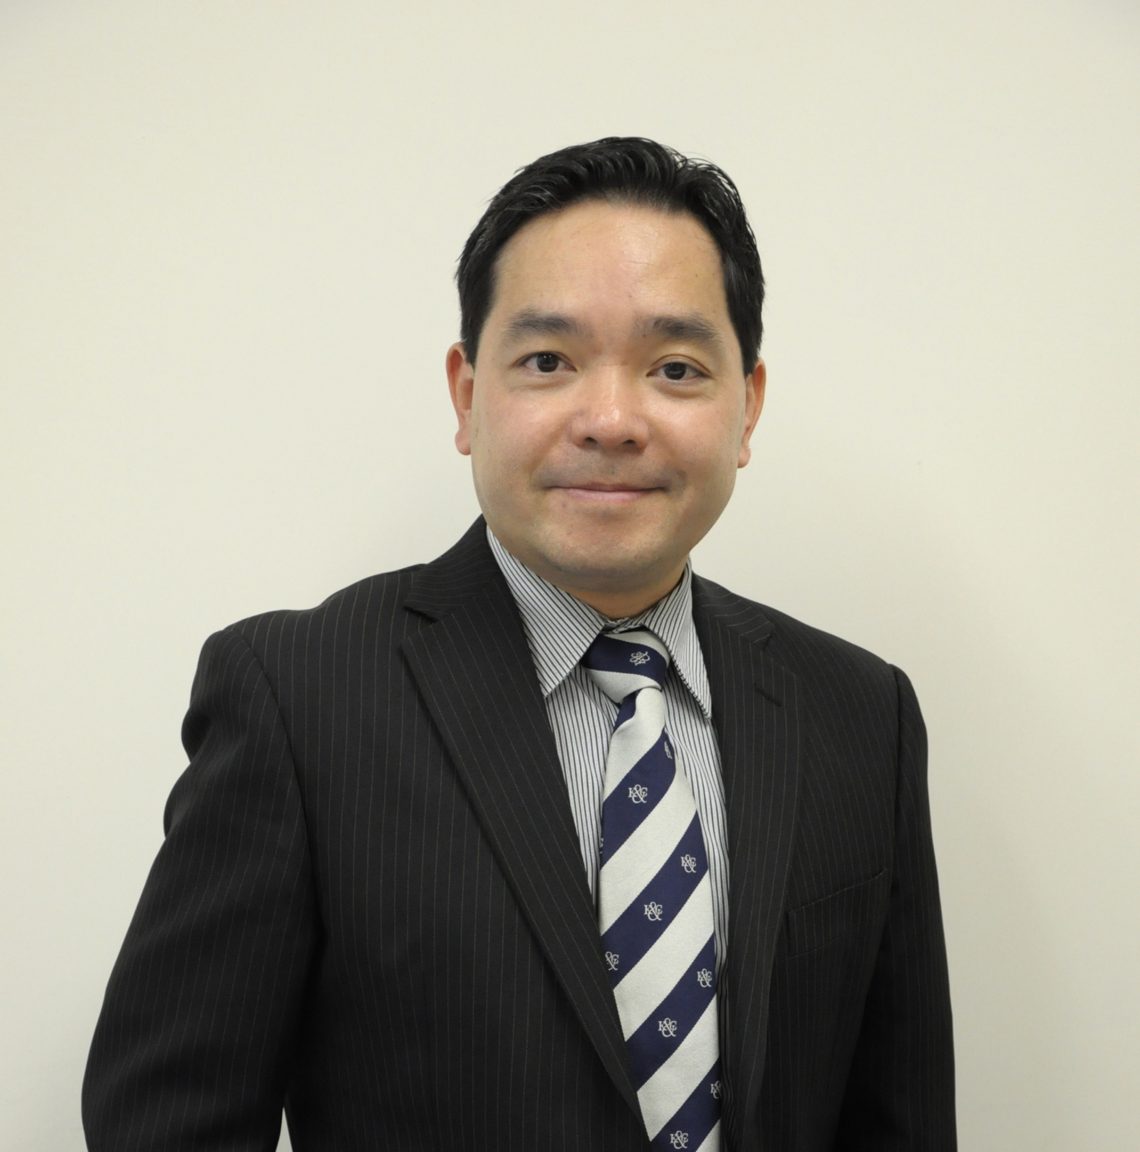 HSUHK appoints Professor Joshua Mok as Provost and Vice-President (Academic and Research)